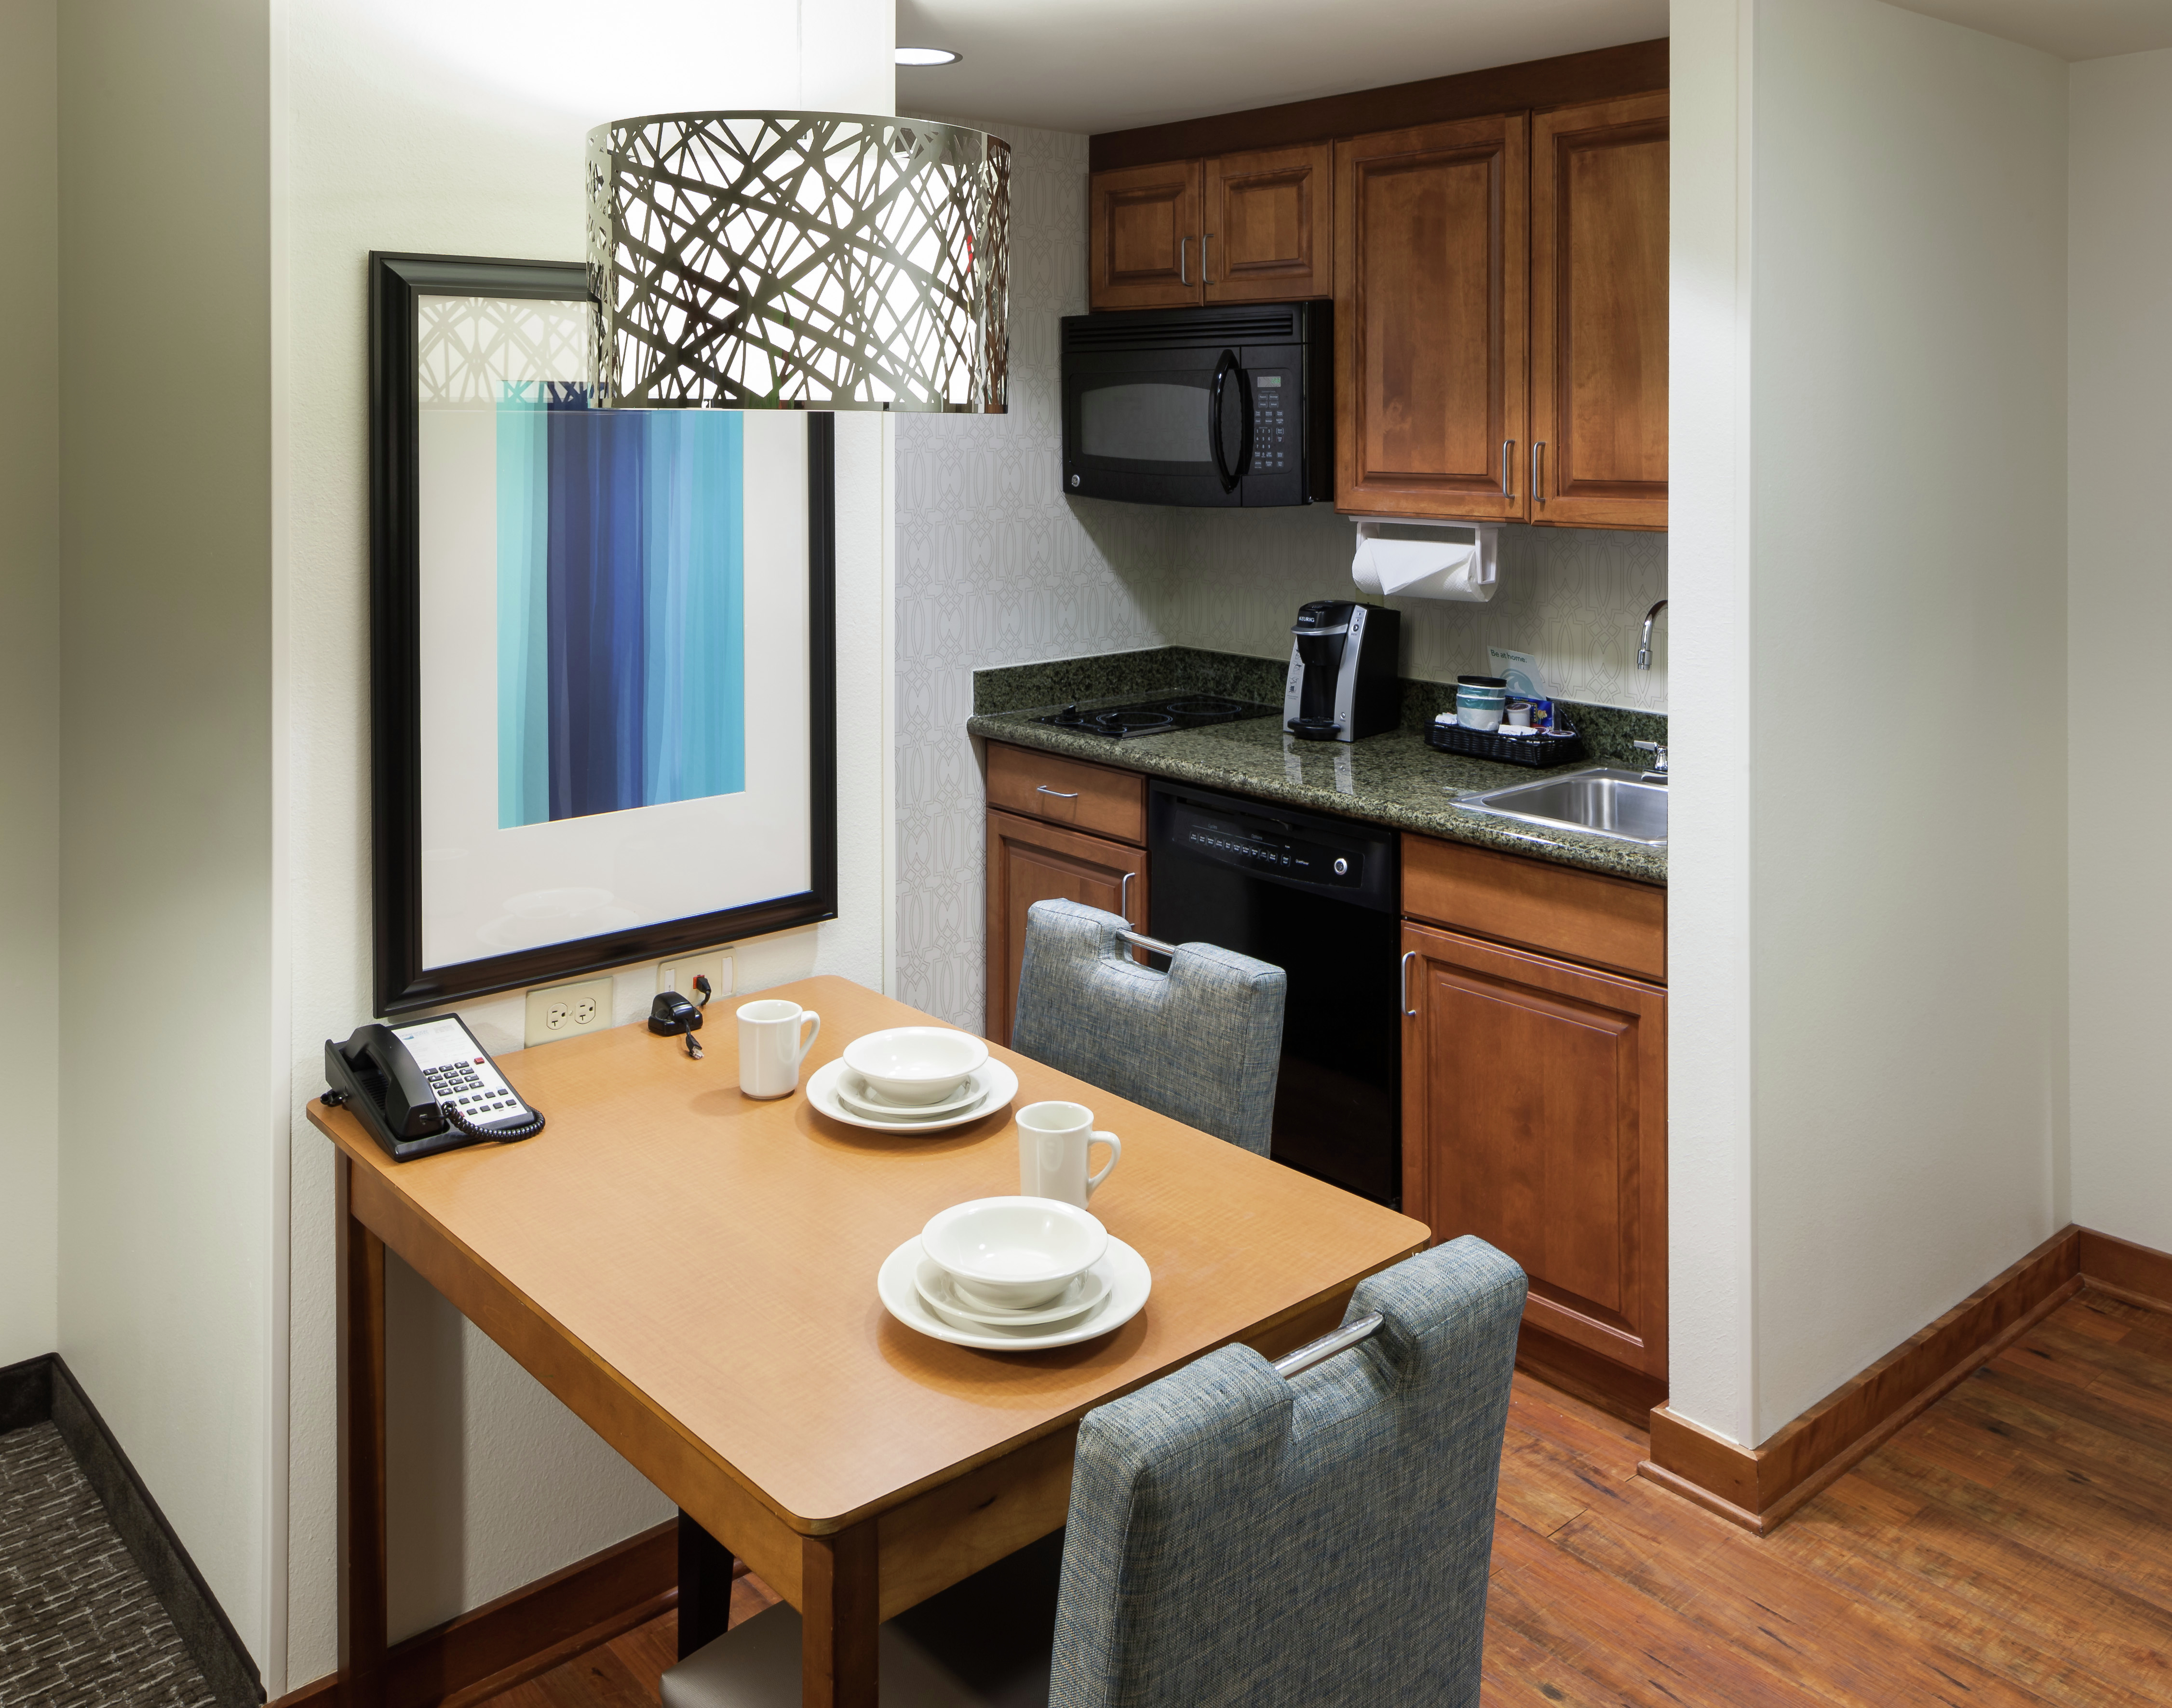 Kitchen and table in guestroom